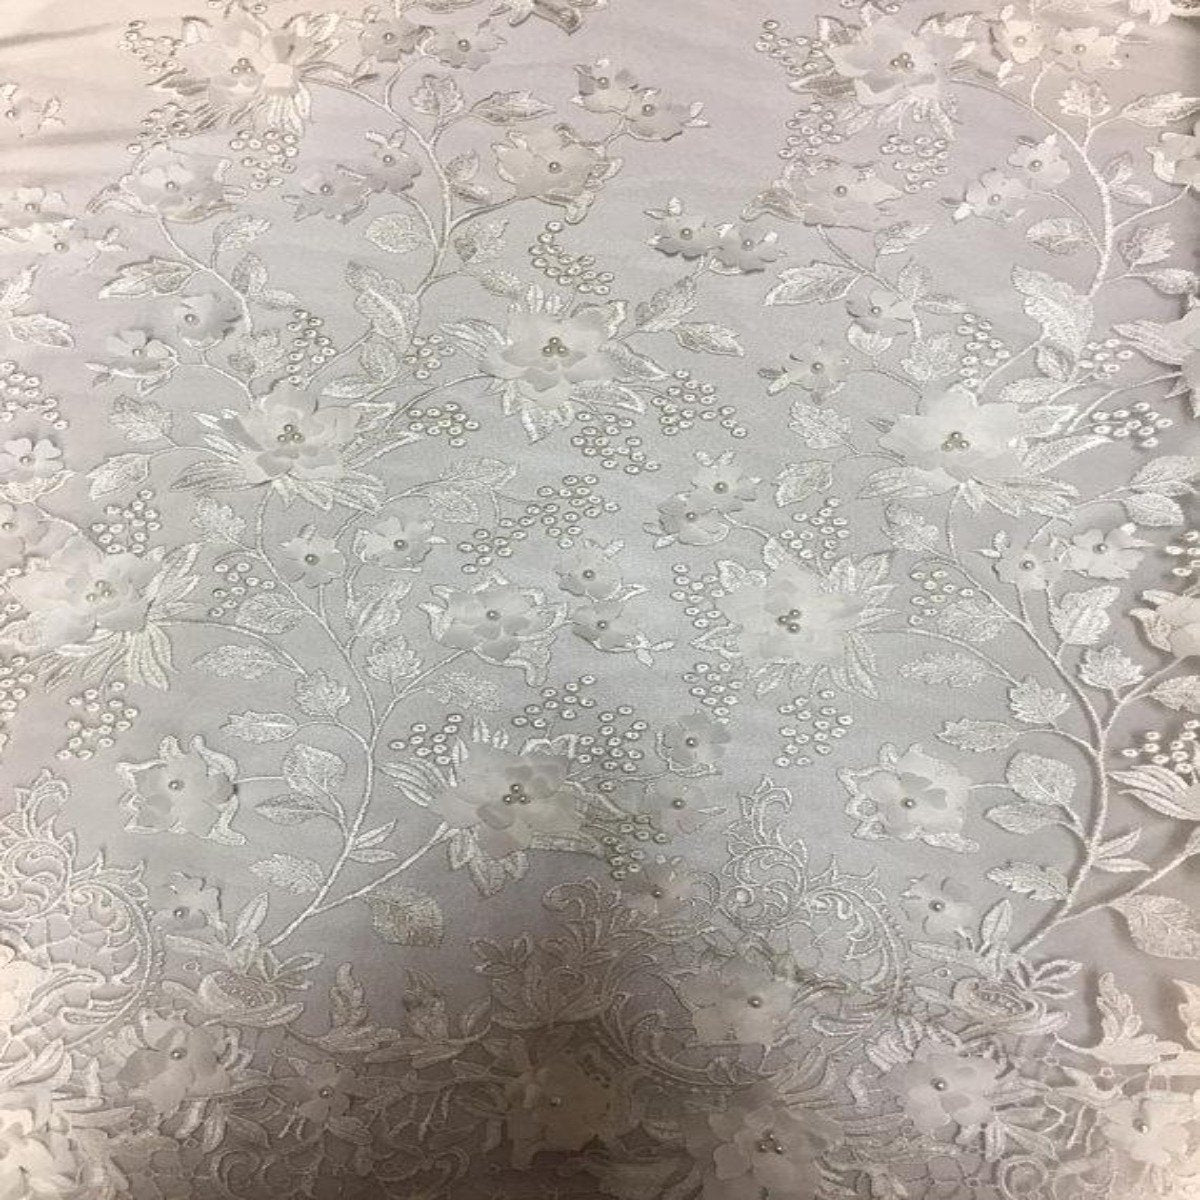 Off White 3D Embroidered Satin Floral Pearl Lace Fabric